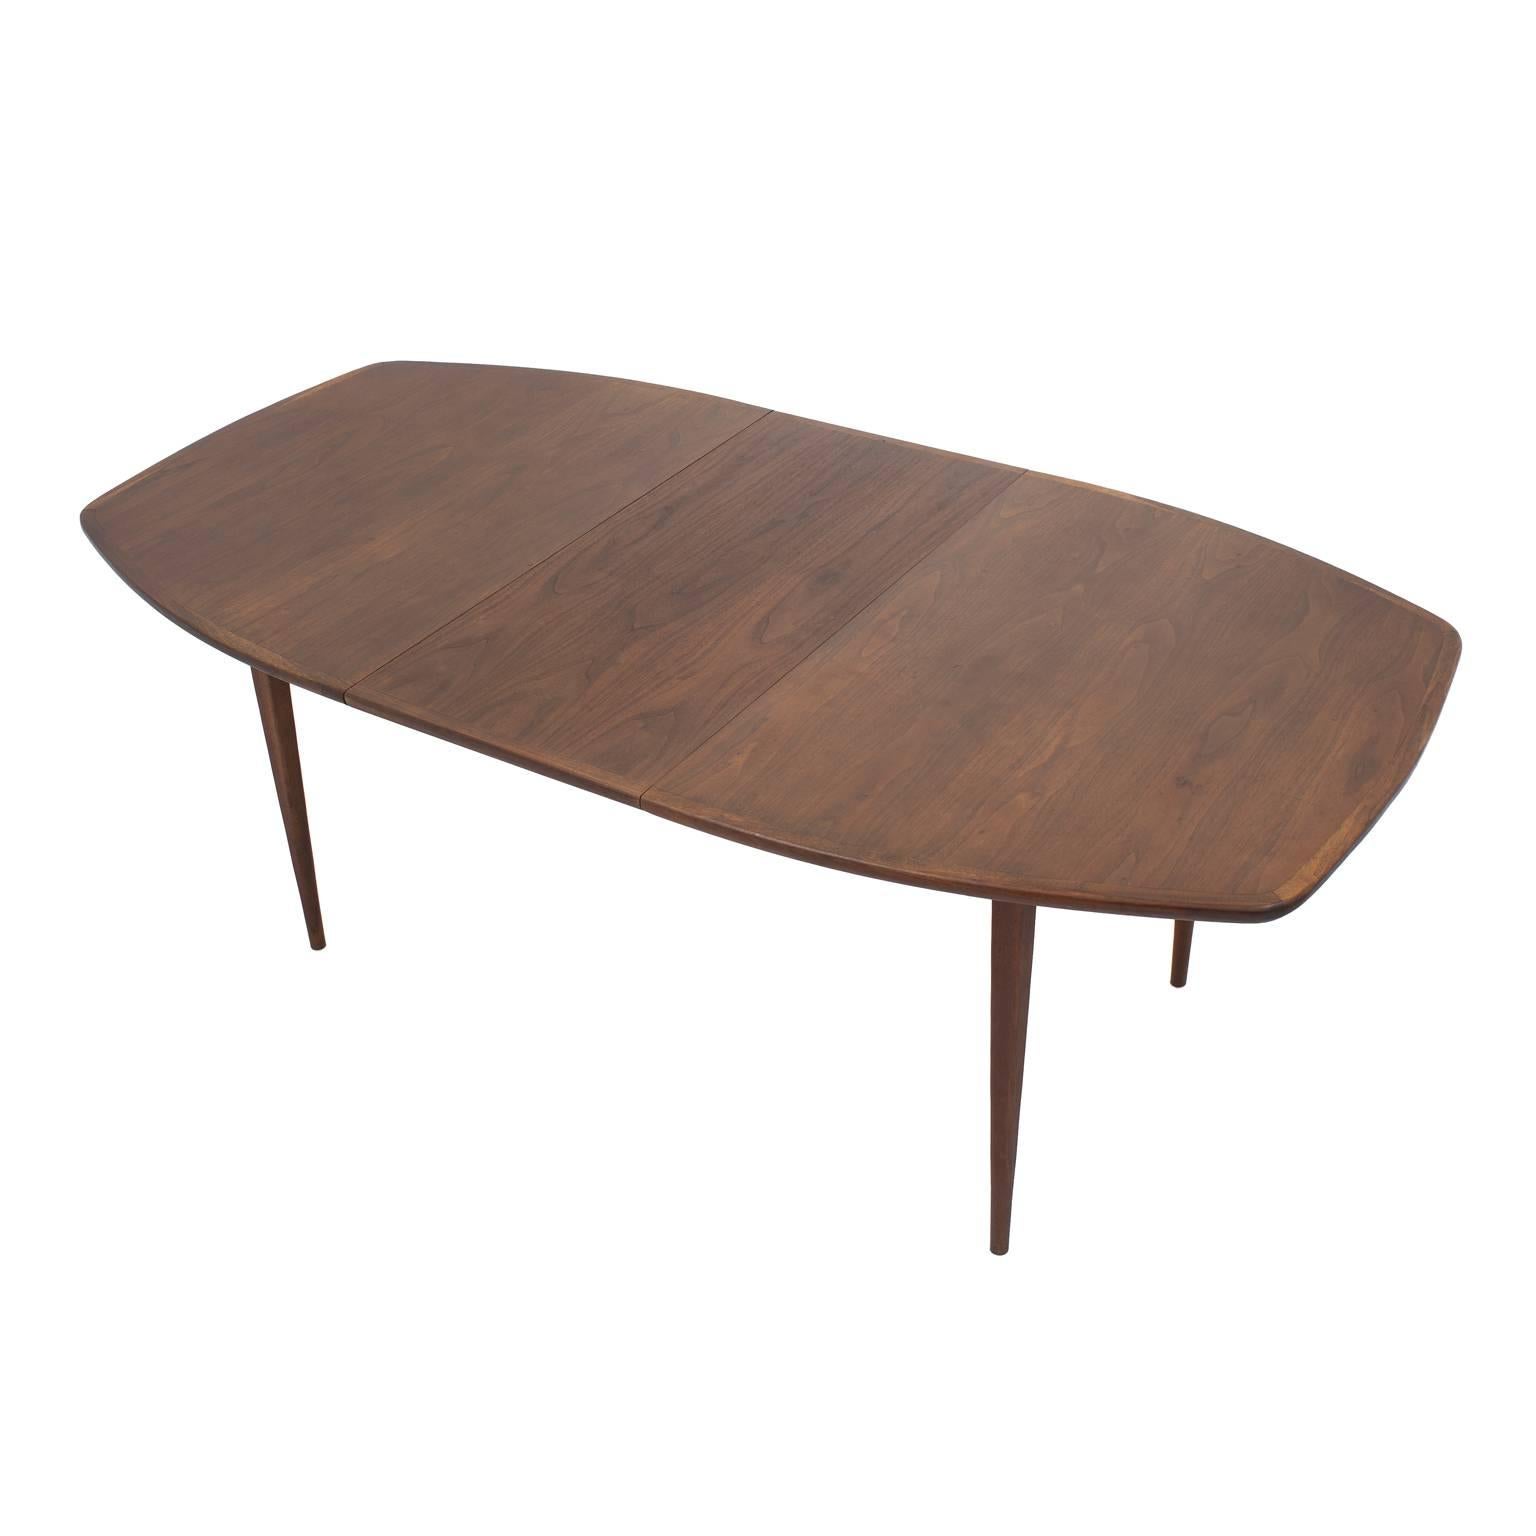 Mid-Century Modern Mid-Century Solid Walnut Dining Table by Dillingham Attributed to Milo Baughman For Sale